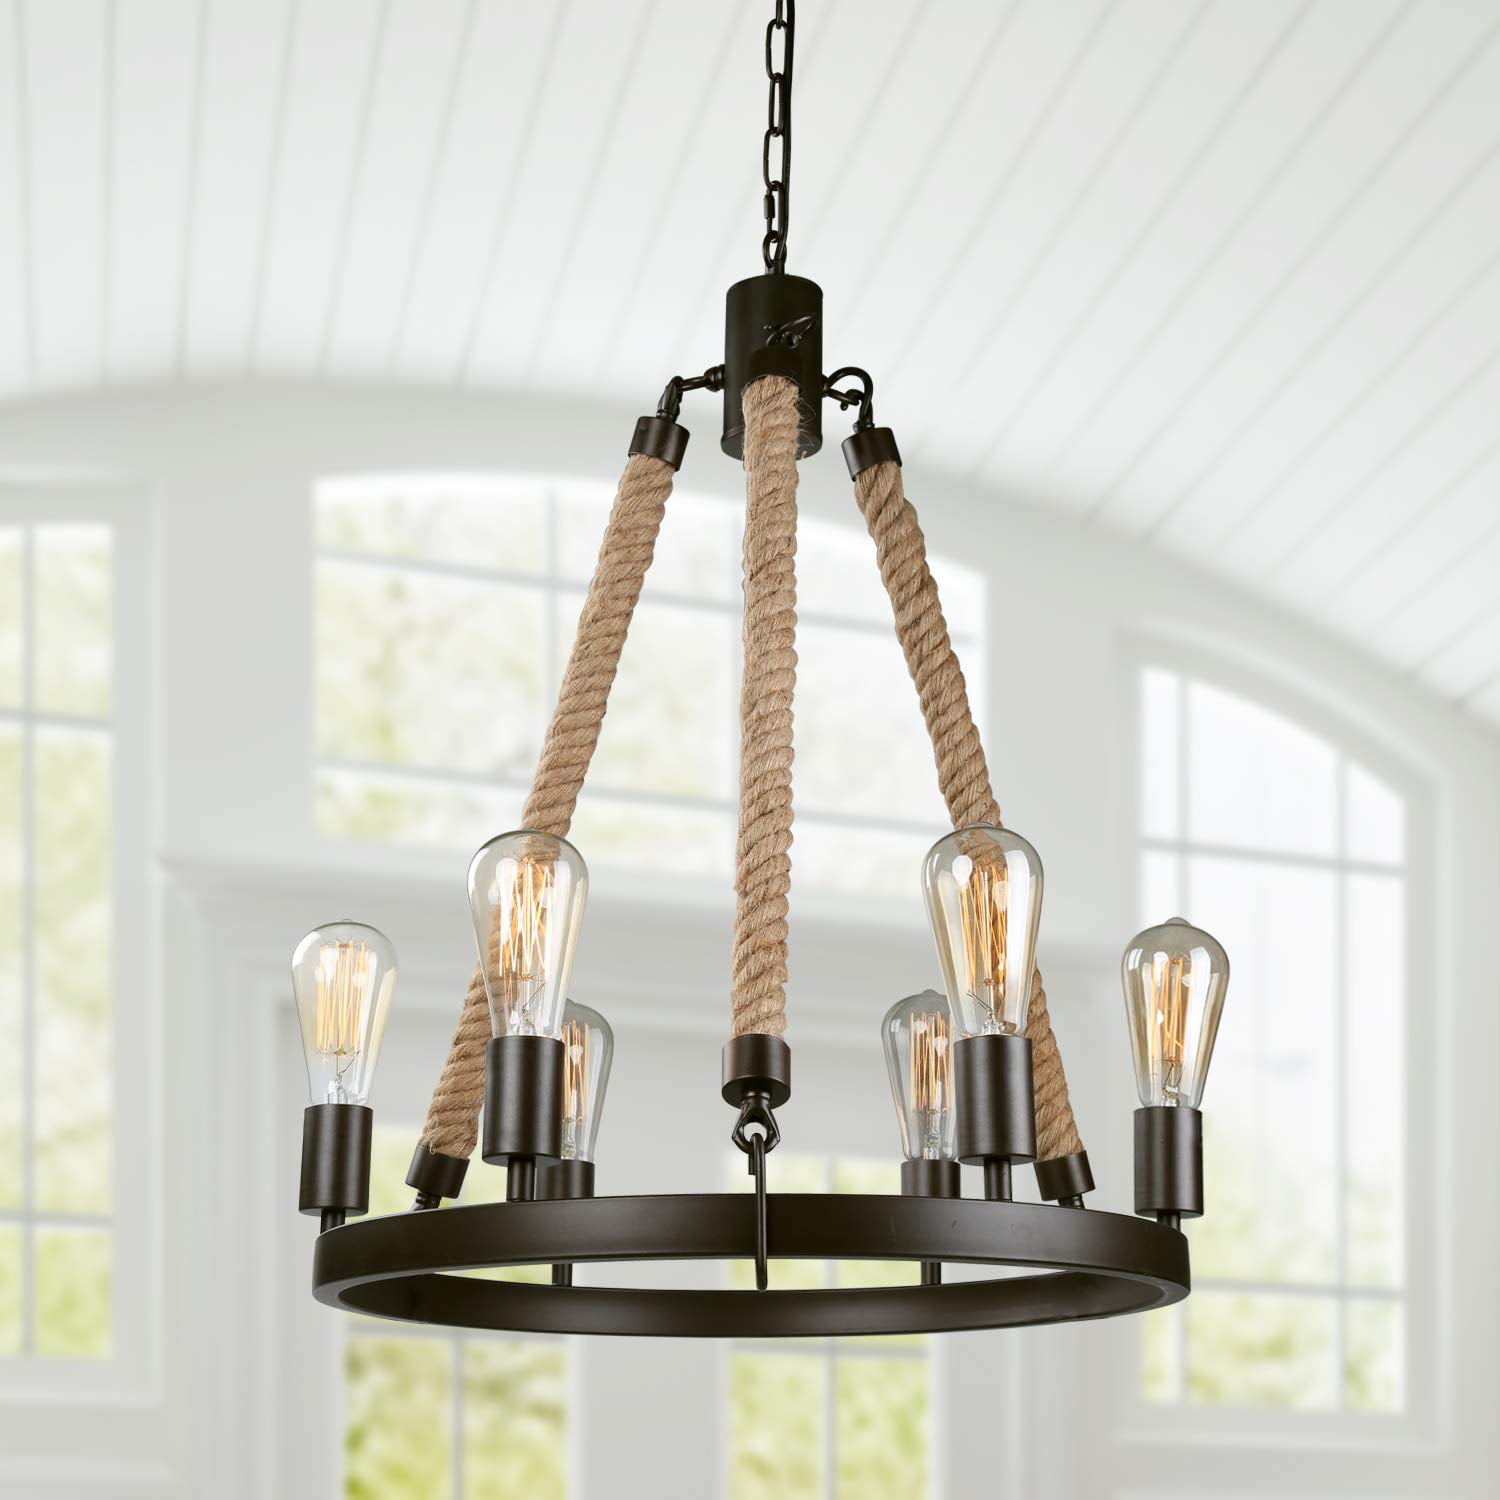 Lnc Farmhouse Chandeliers For Dining, Antique Looking Light Fixtures